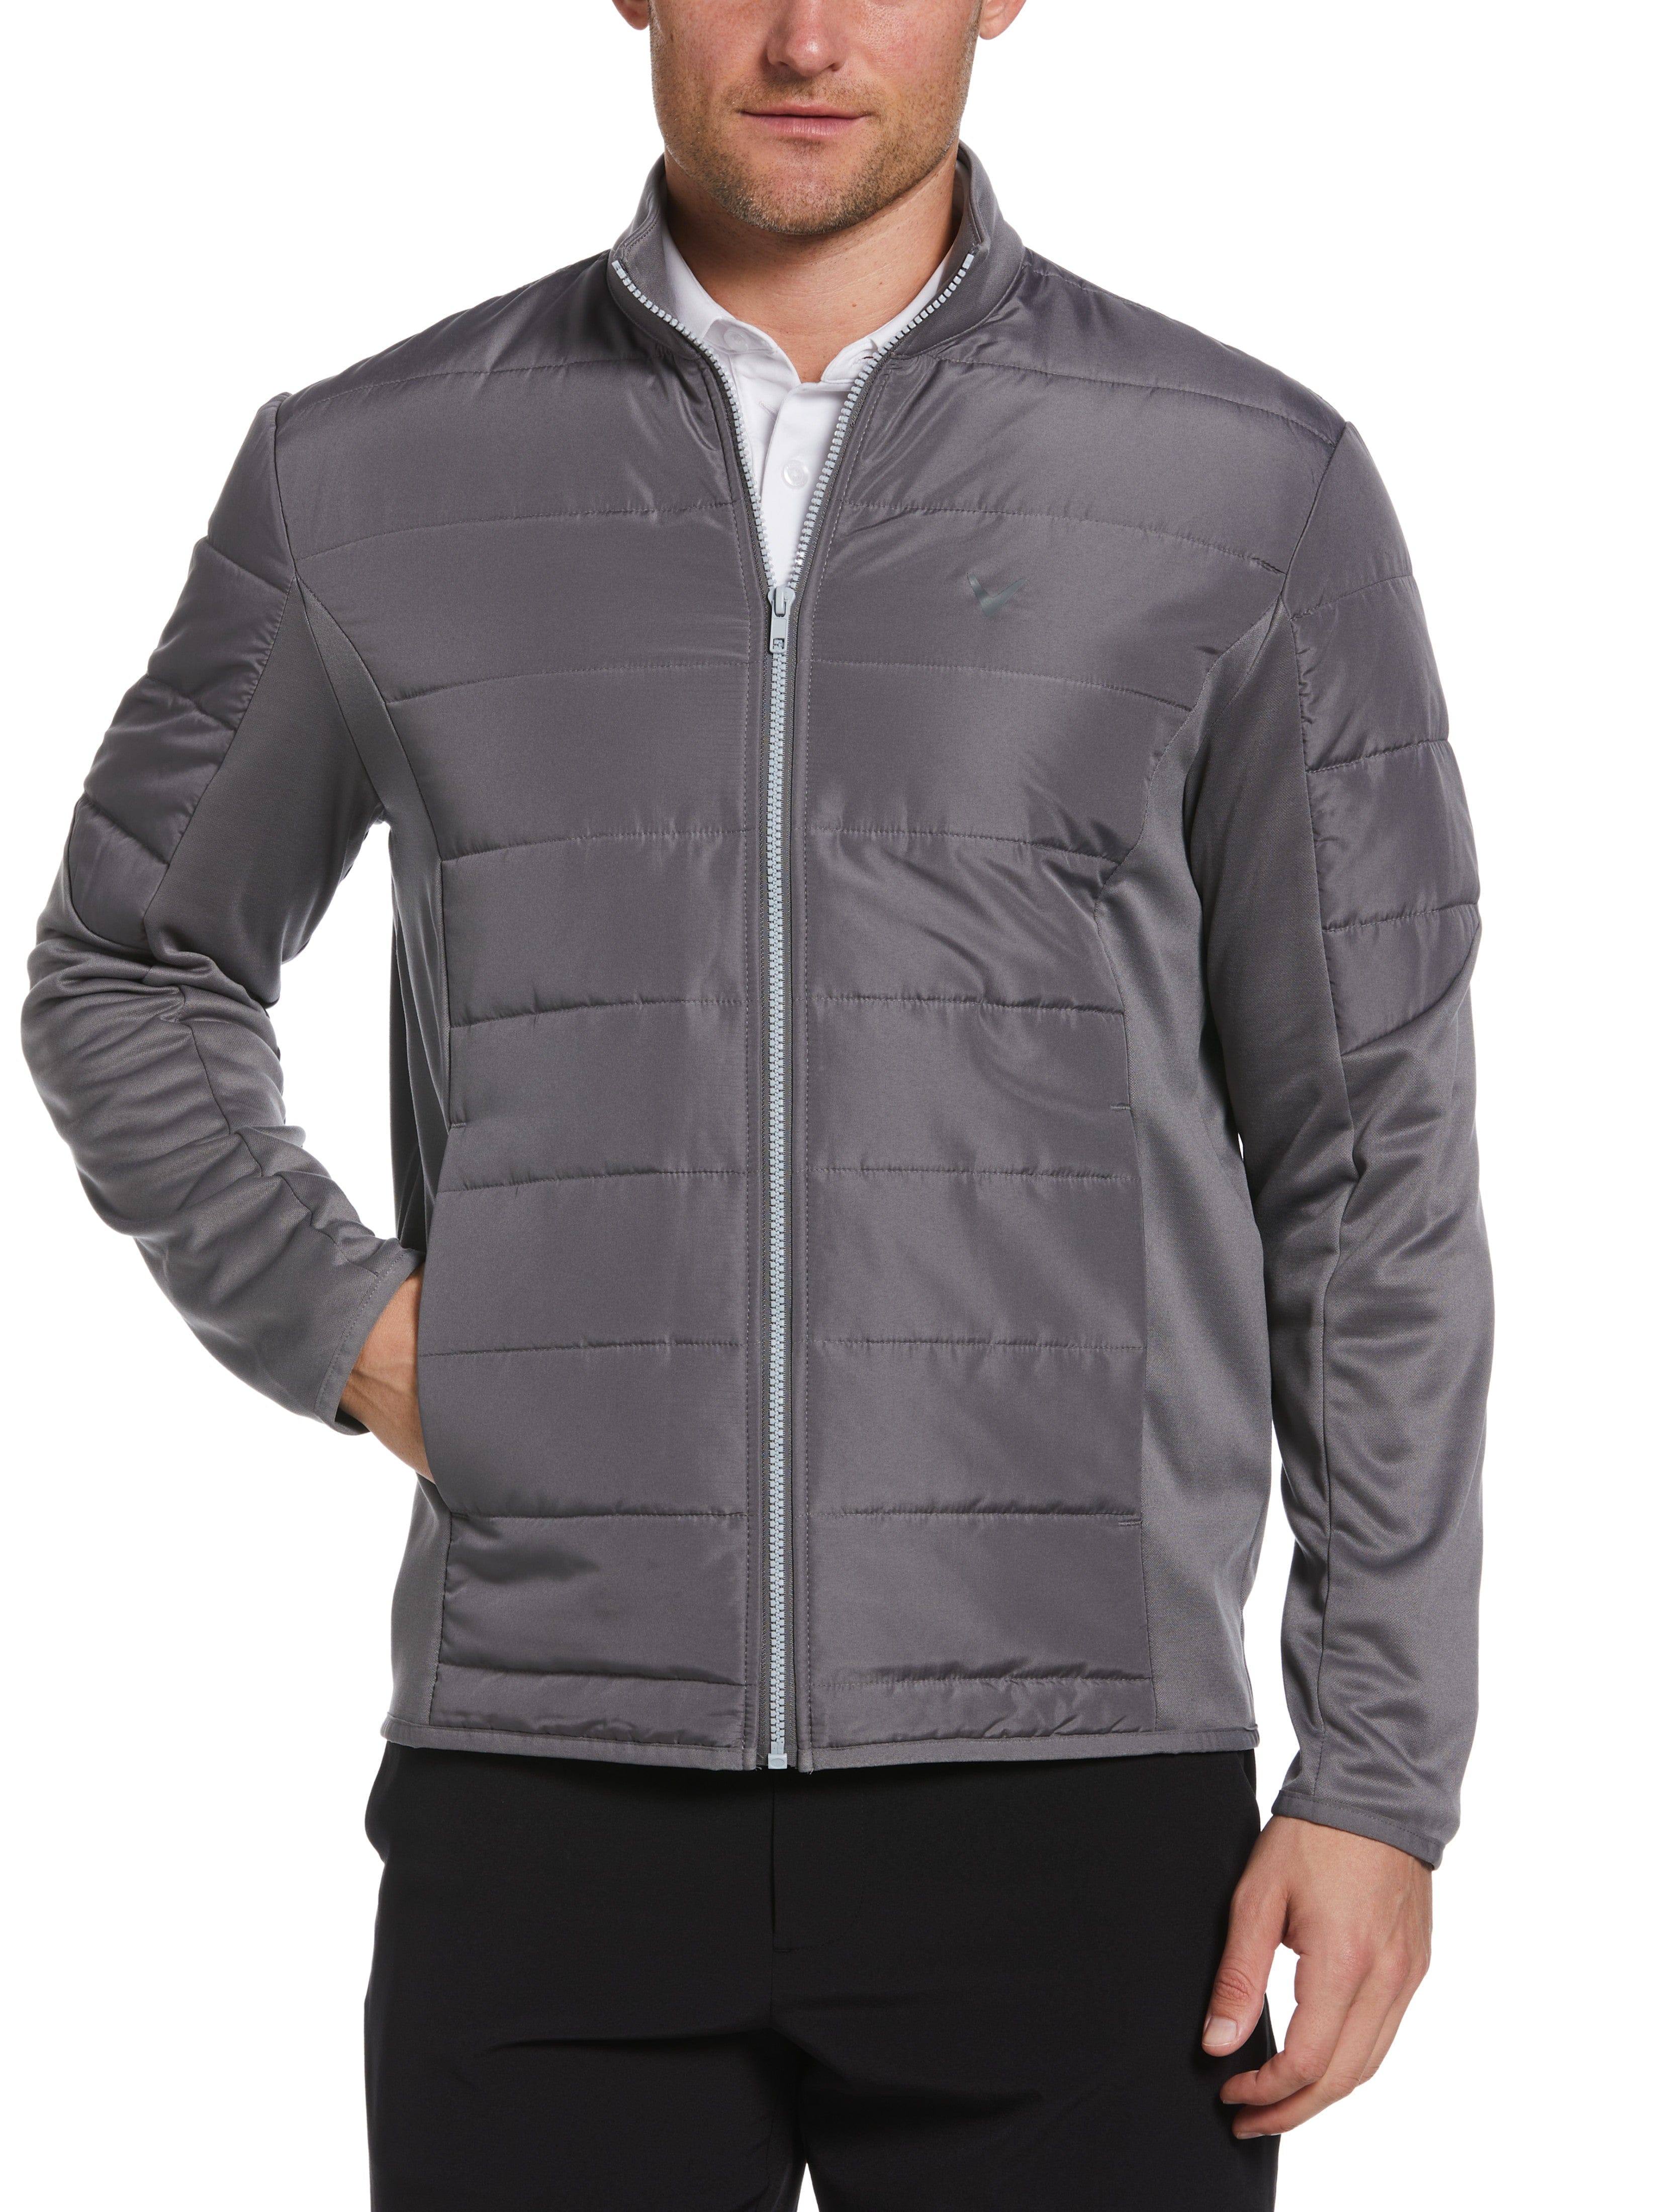 Callaway Apparel Mens Hybrid Performance Puffer Jacket Top, Size Large, Quiet Shade Gray, 100% Polyester | Golf Apparel Shop